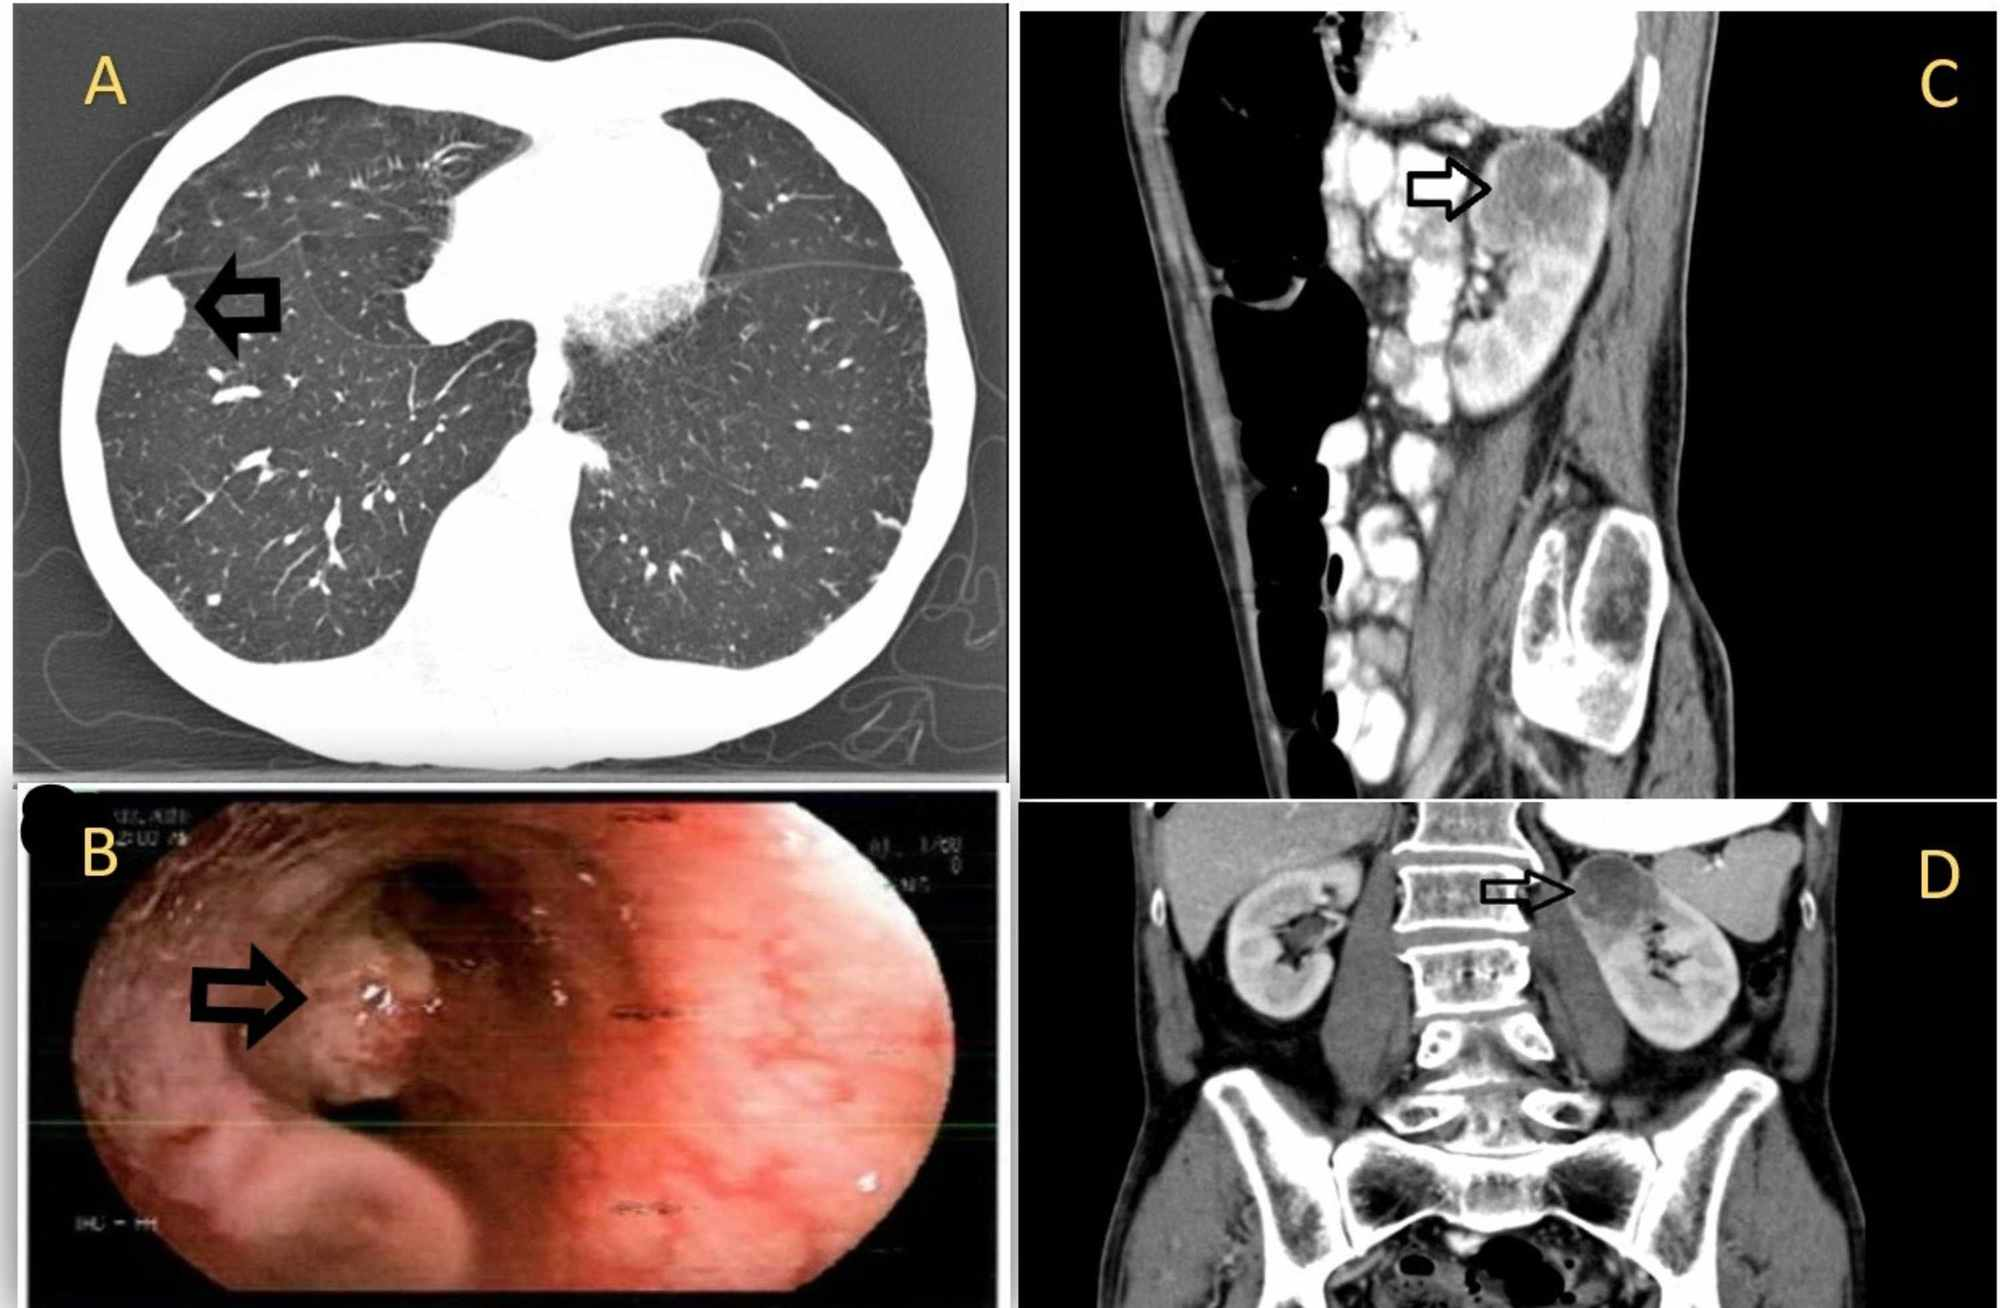 Cureus Isolated Renal Metastasis From Primary Lung Squamous Cell